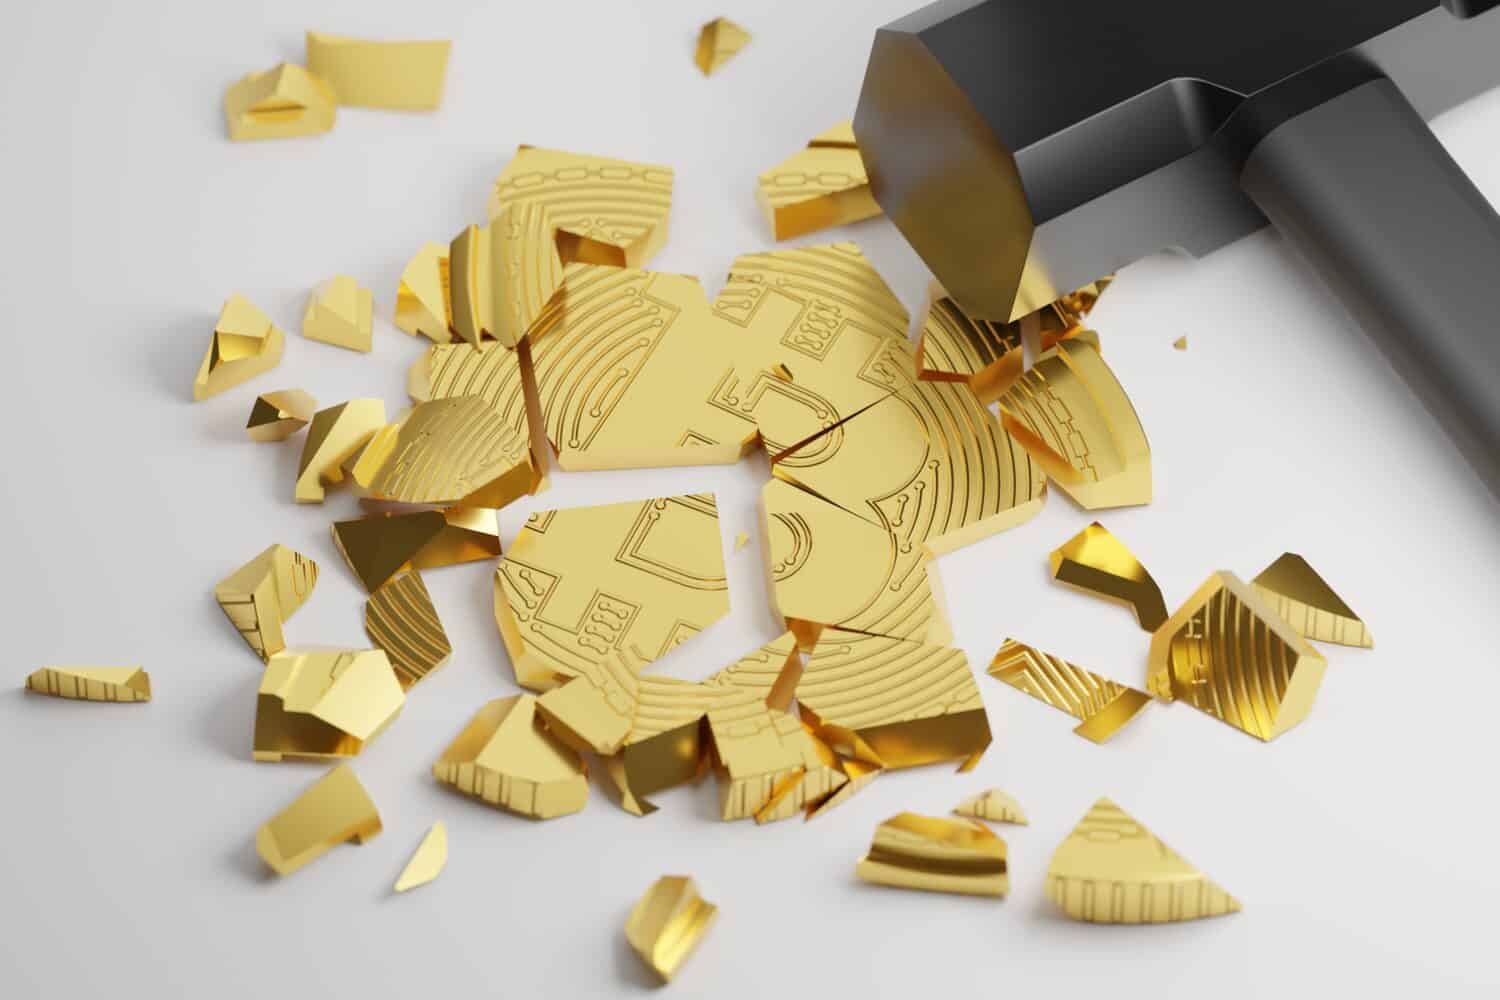 3D rendering gold Bitcoin Break down with hammer fall, Cryptocurrency investment technology digital money crash crisis concept design on white background